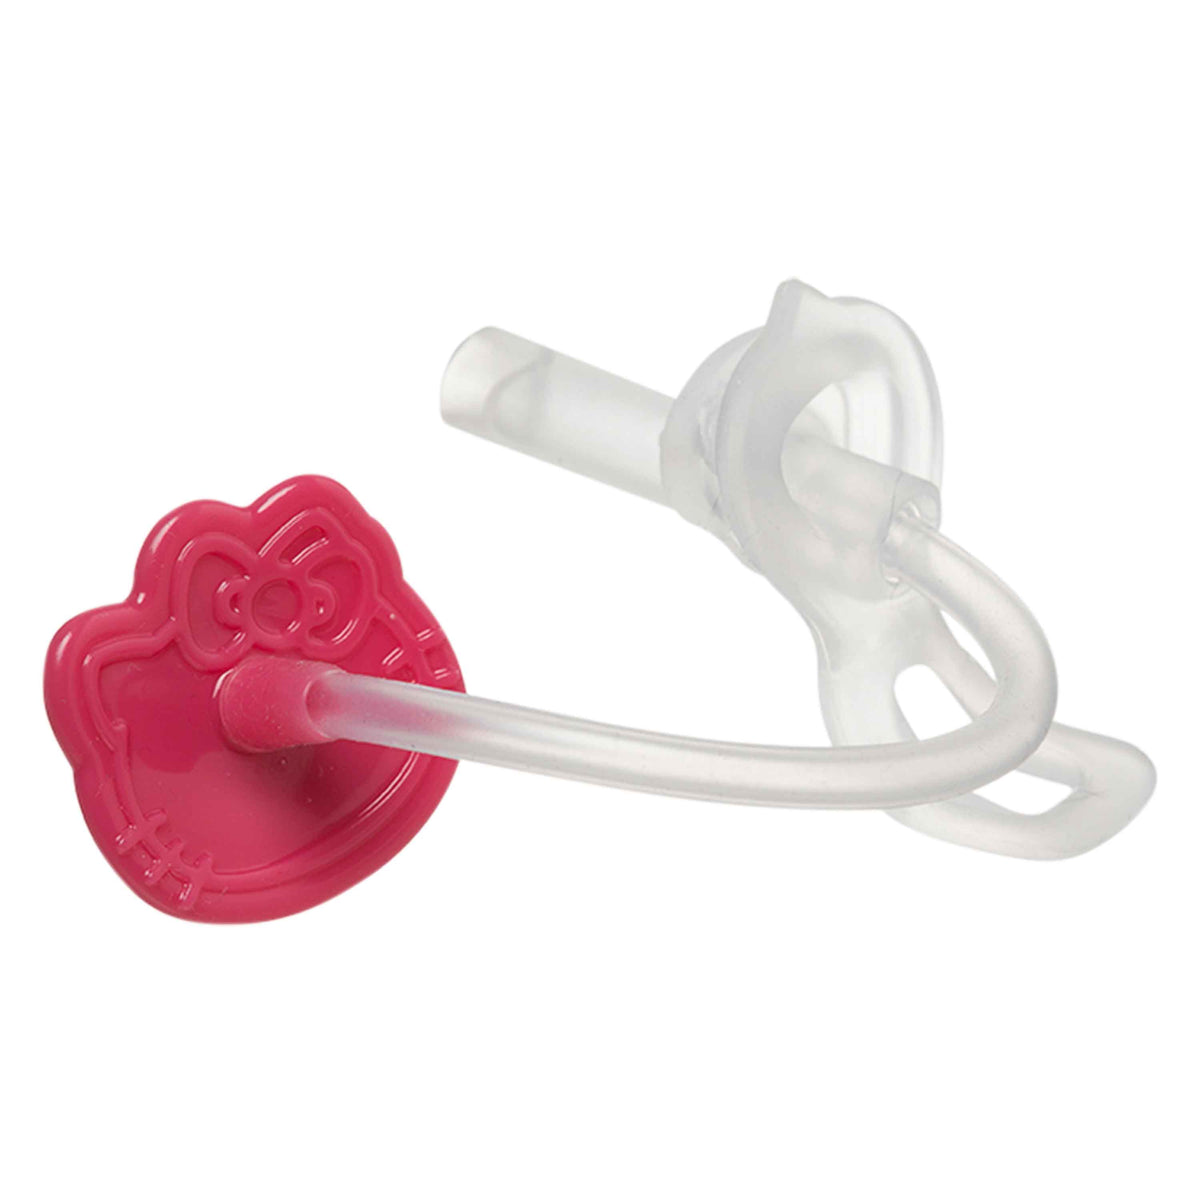 b.box x Hello Kitty Sippy Cup Replacement Straw and Cleaning Kit - Pop Star